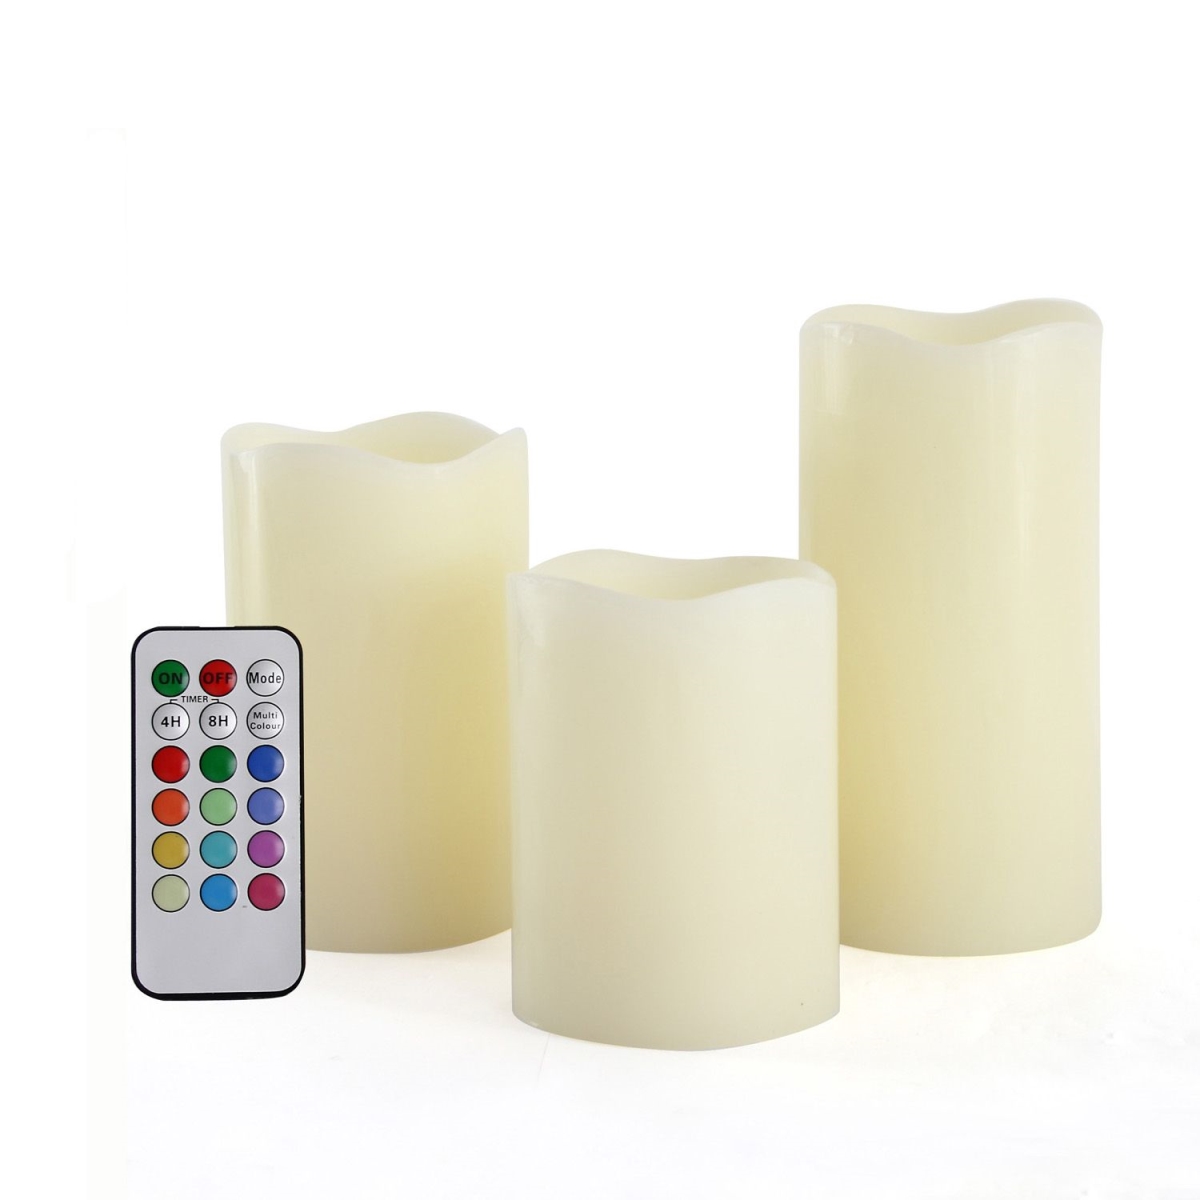 Cac70rw31456m Round Melted Edge Remote Controlled Changing Flameless Wax Pillar Candles, Multicolor - Set Of 3